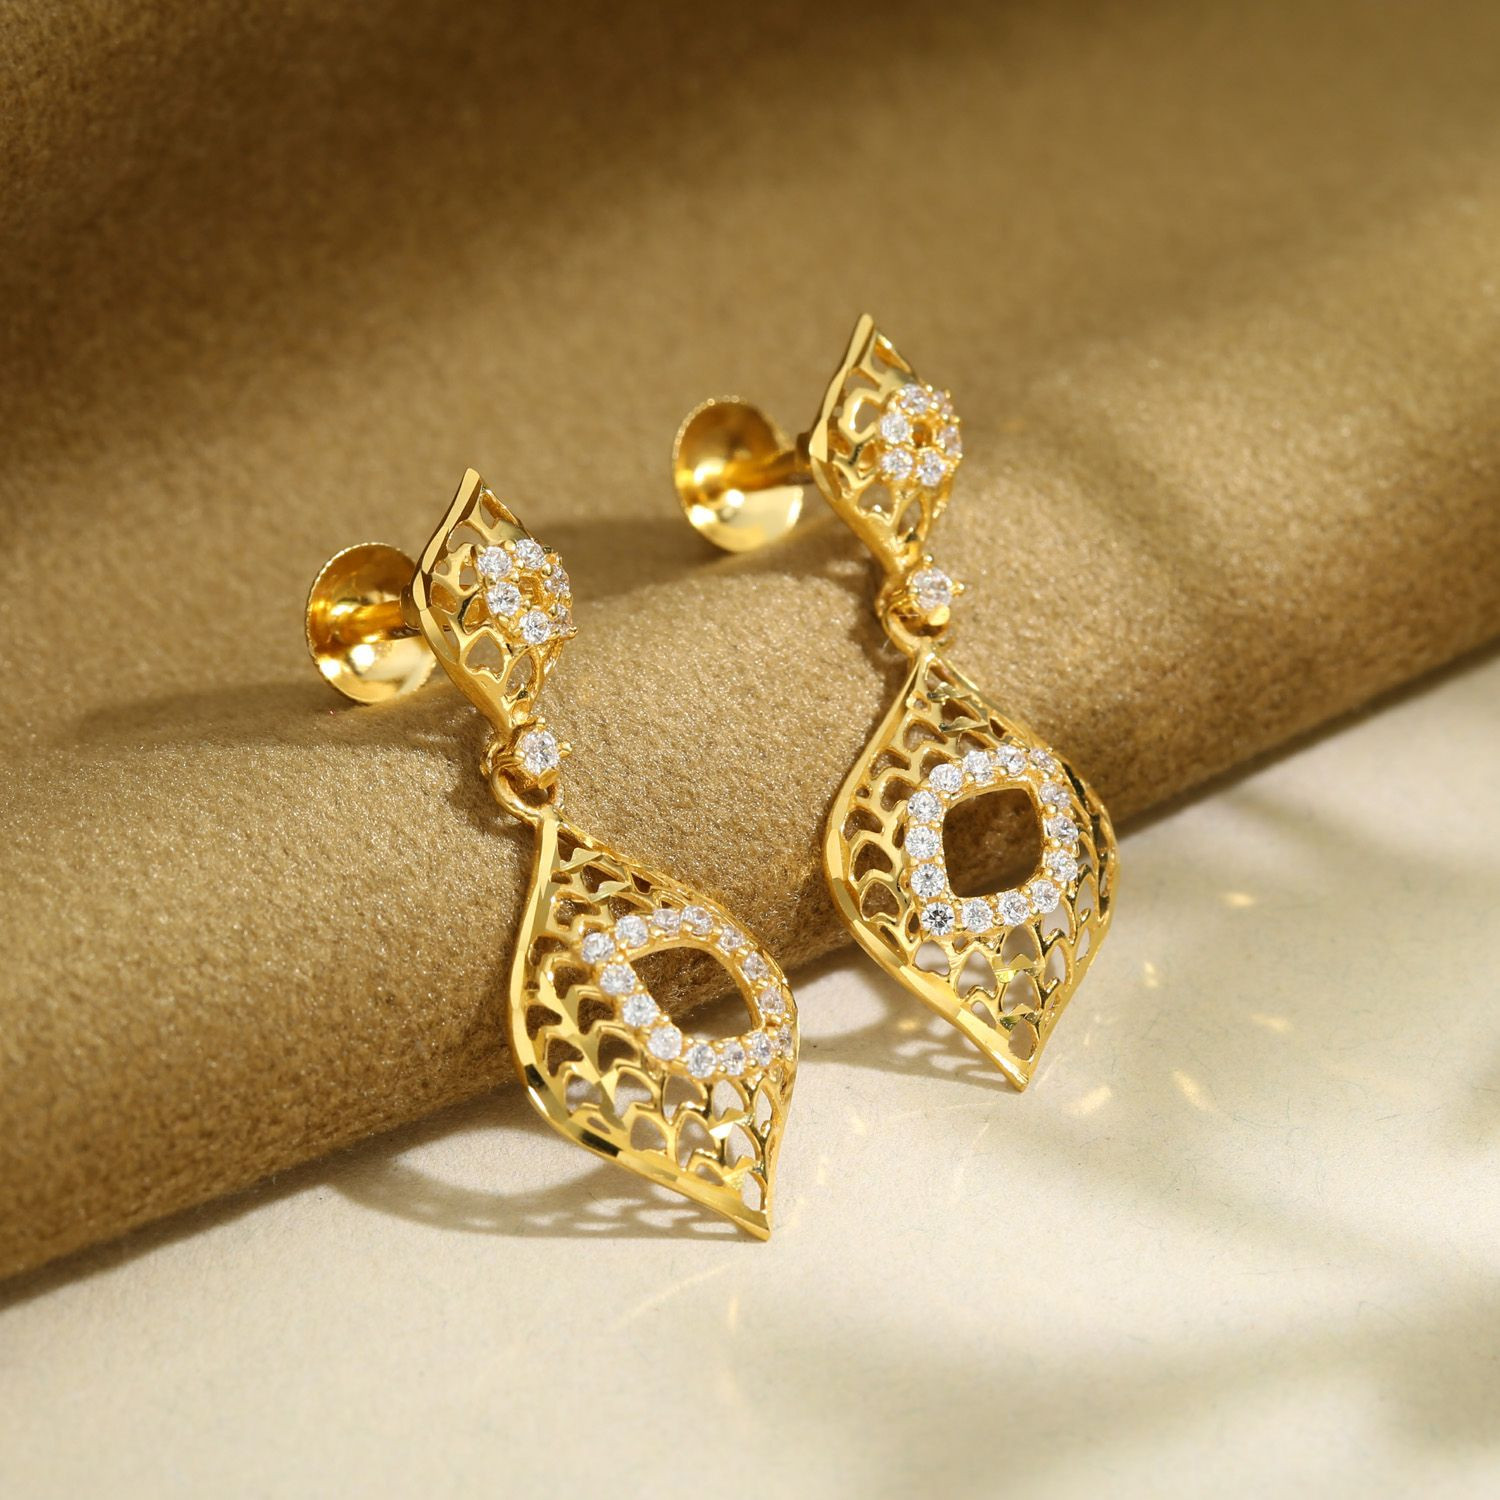 Gold Antique Earrings From Malabar Gold  Diamonds  South India Jewels